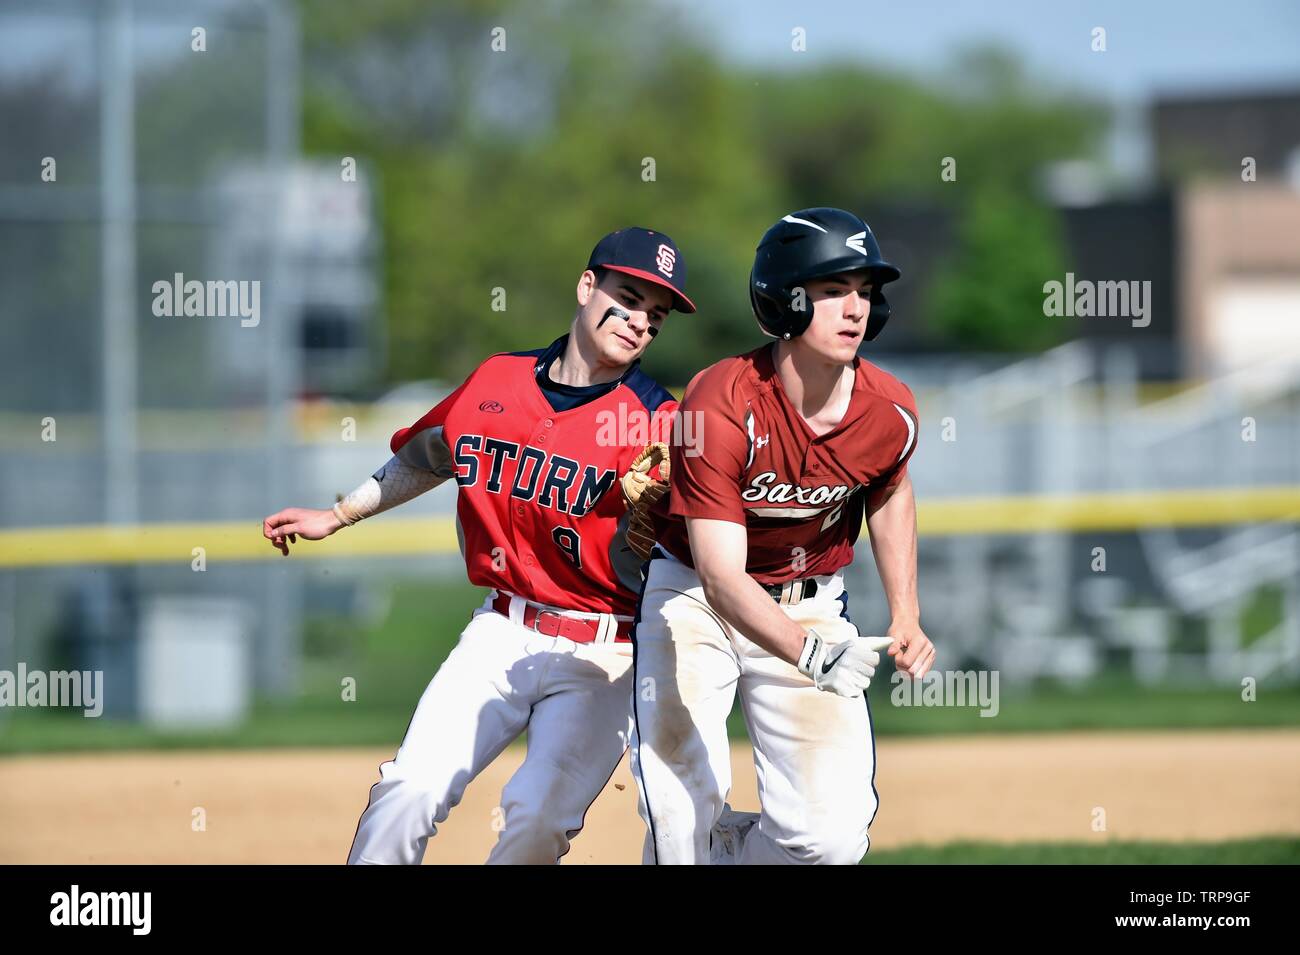 Second baseman applying a tag to an opposing runner during a rundown after the runner was picked off second base. USA. Stock Photo